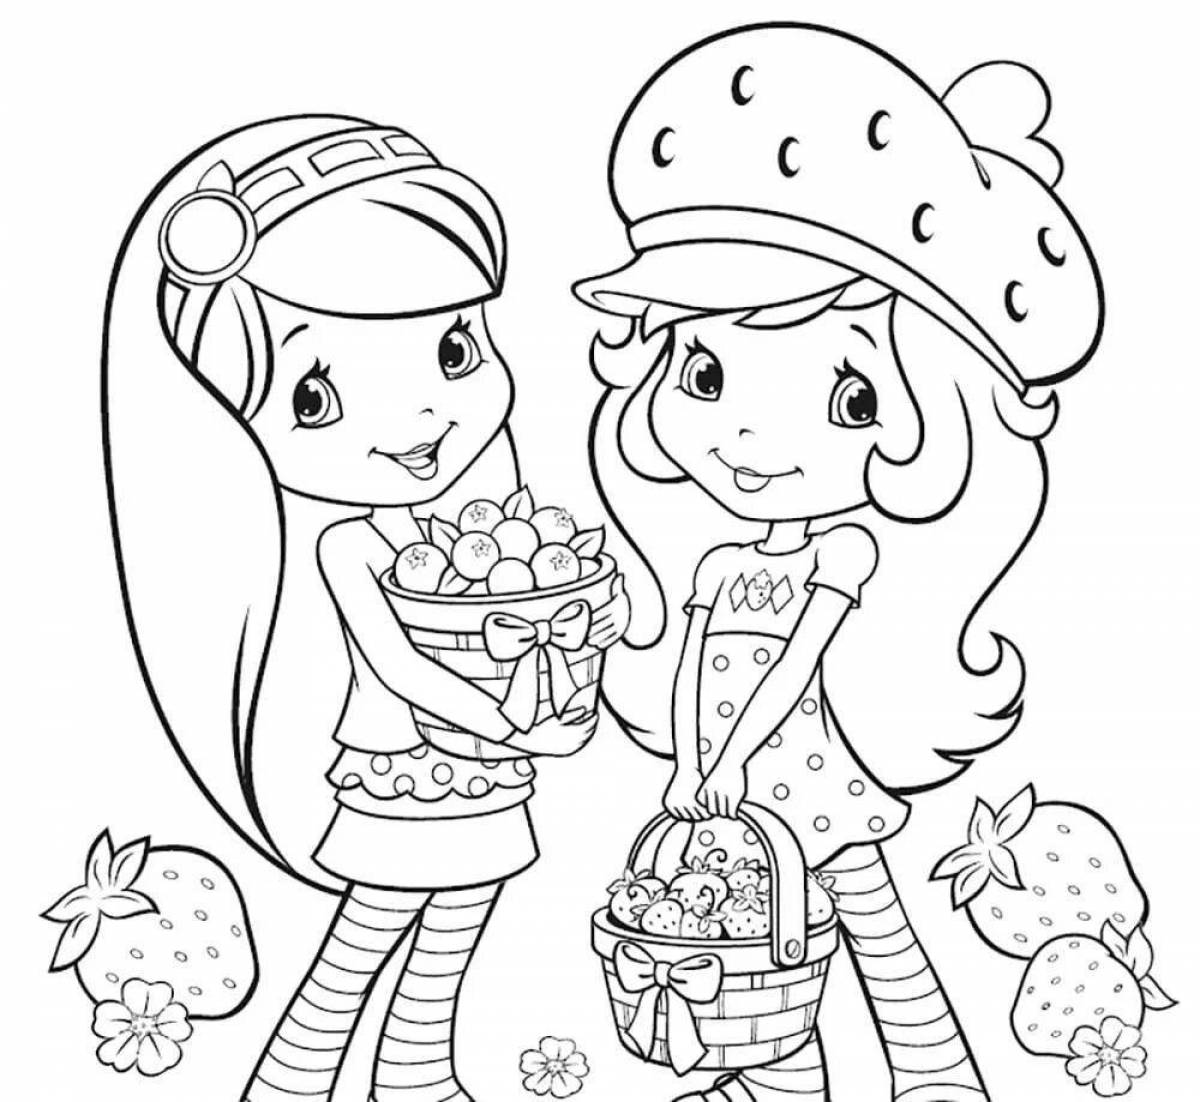 Magic coloring book for girls